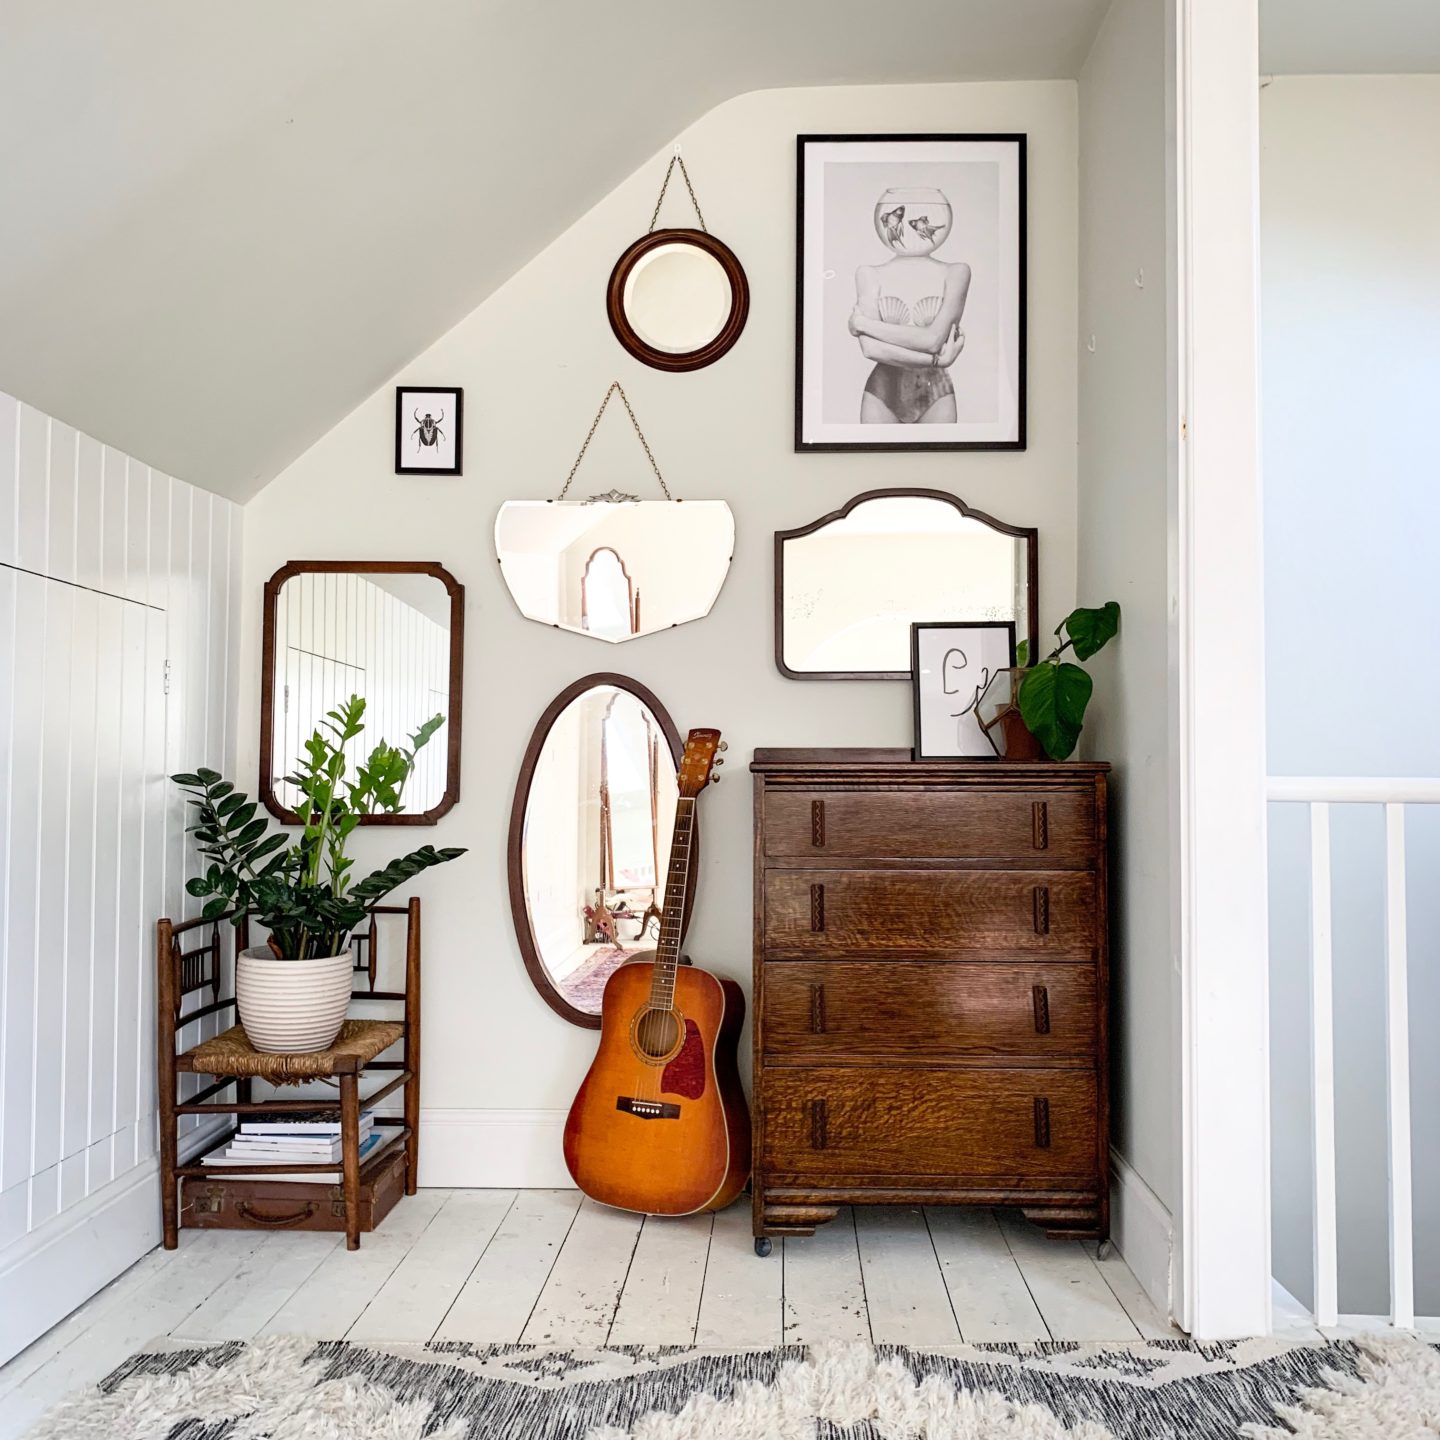 How to Add Personality to Your Home Using Wall Art